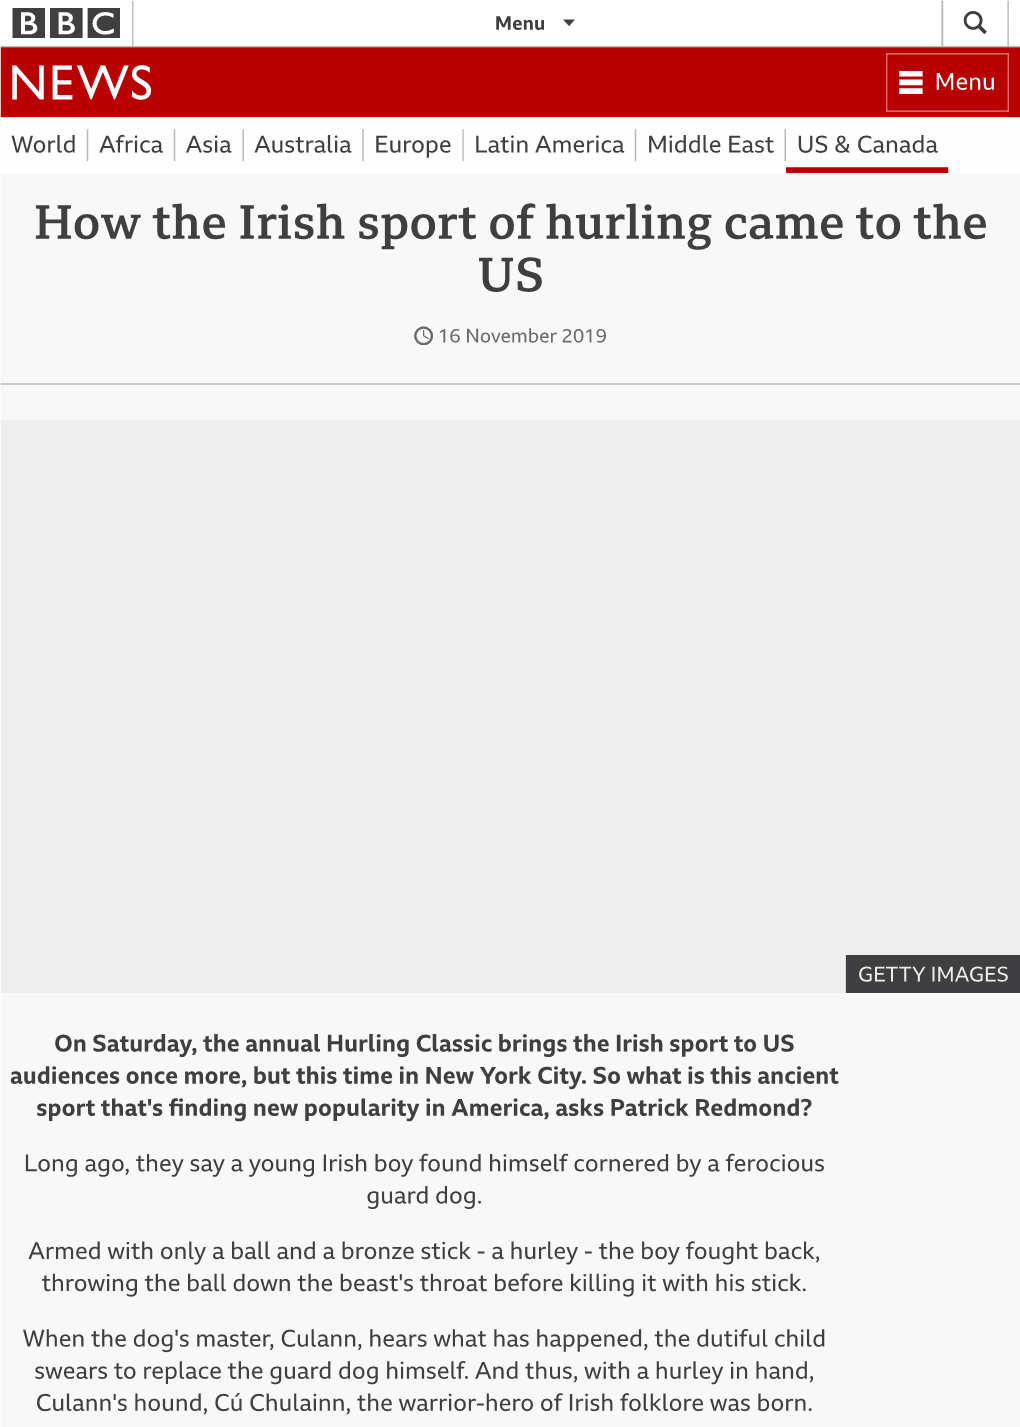 How the Irish Sport of Hurling Came to the US